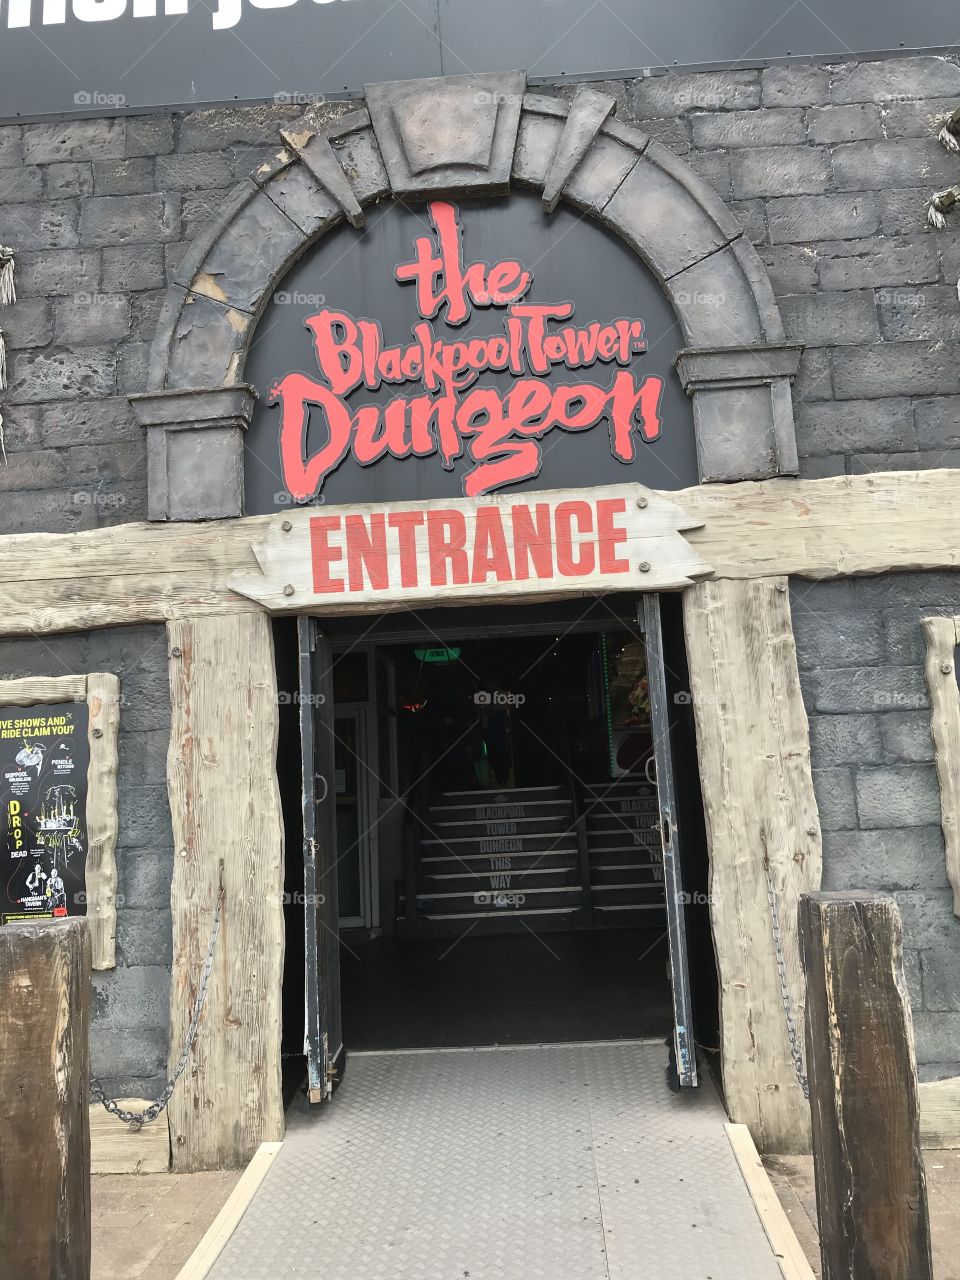 Do u dare to go to the dungeon look no further go in if u dare Blackpool awaits